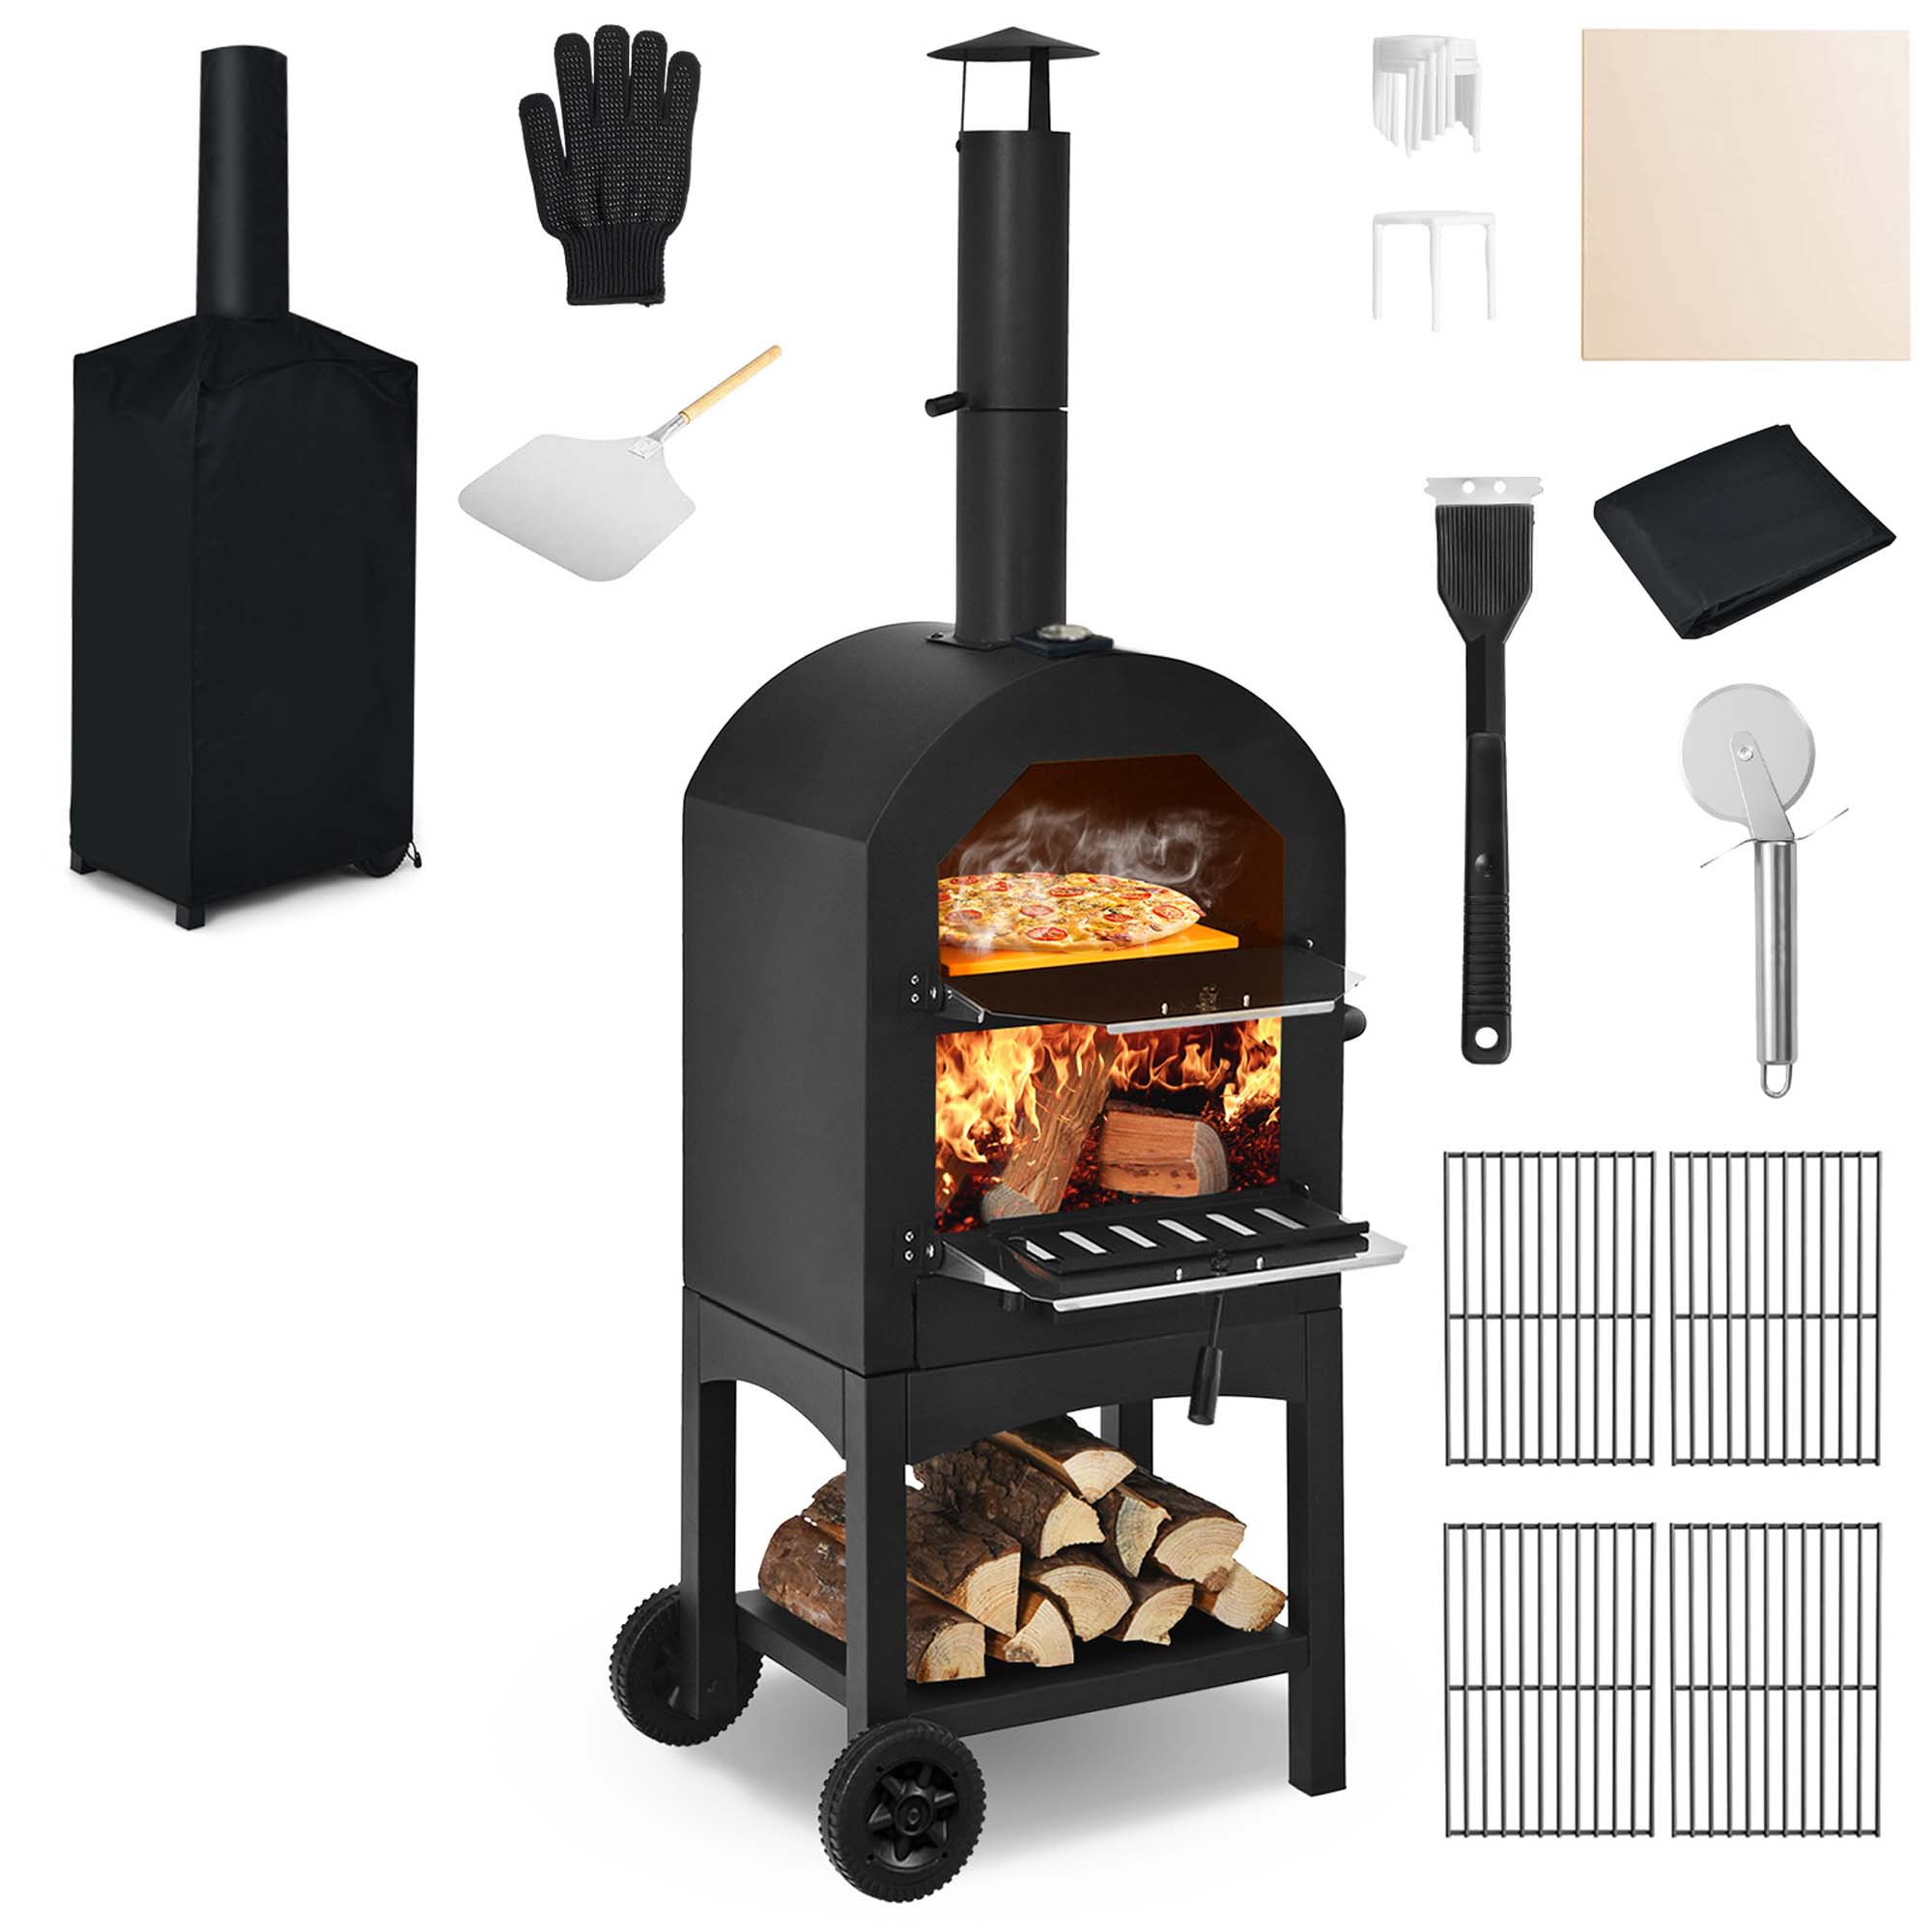 Costway Outdoor Pizza Oven Wood Fire Pizza Maker Grill w/ Pizza Stone & Waterproof Cover - image 1 of 10